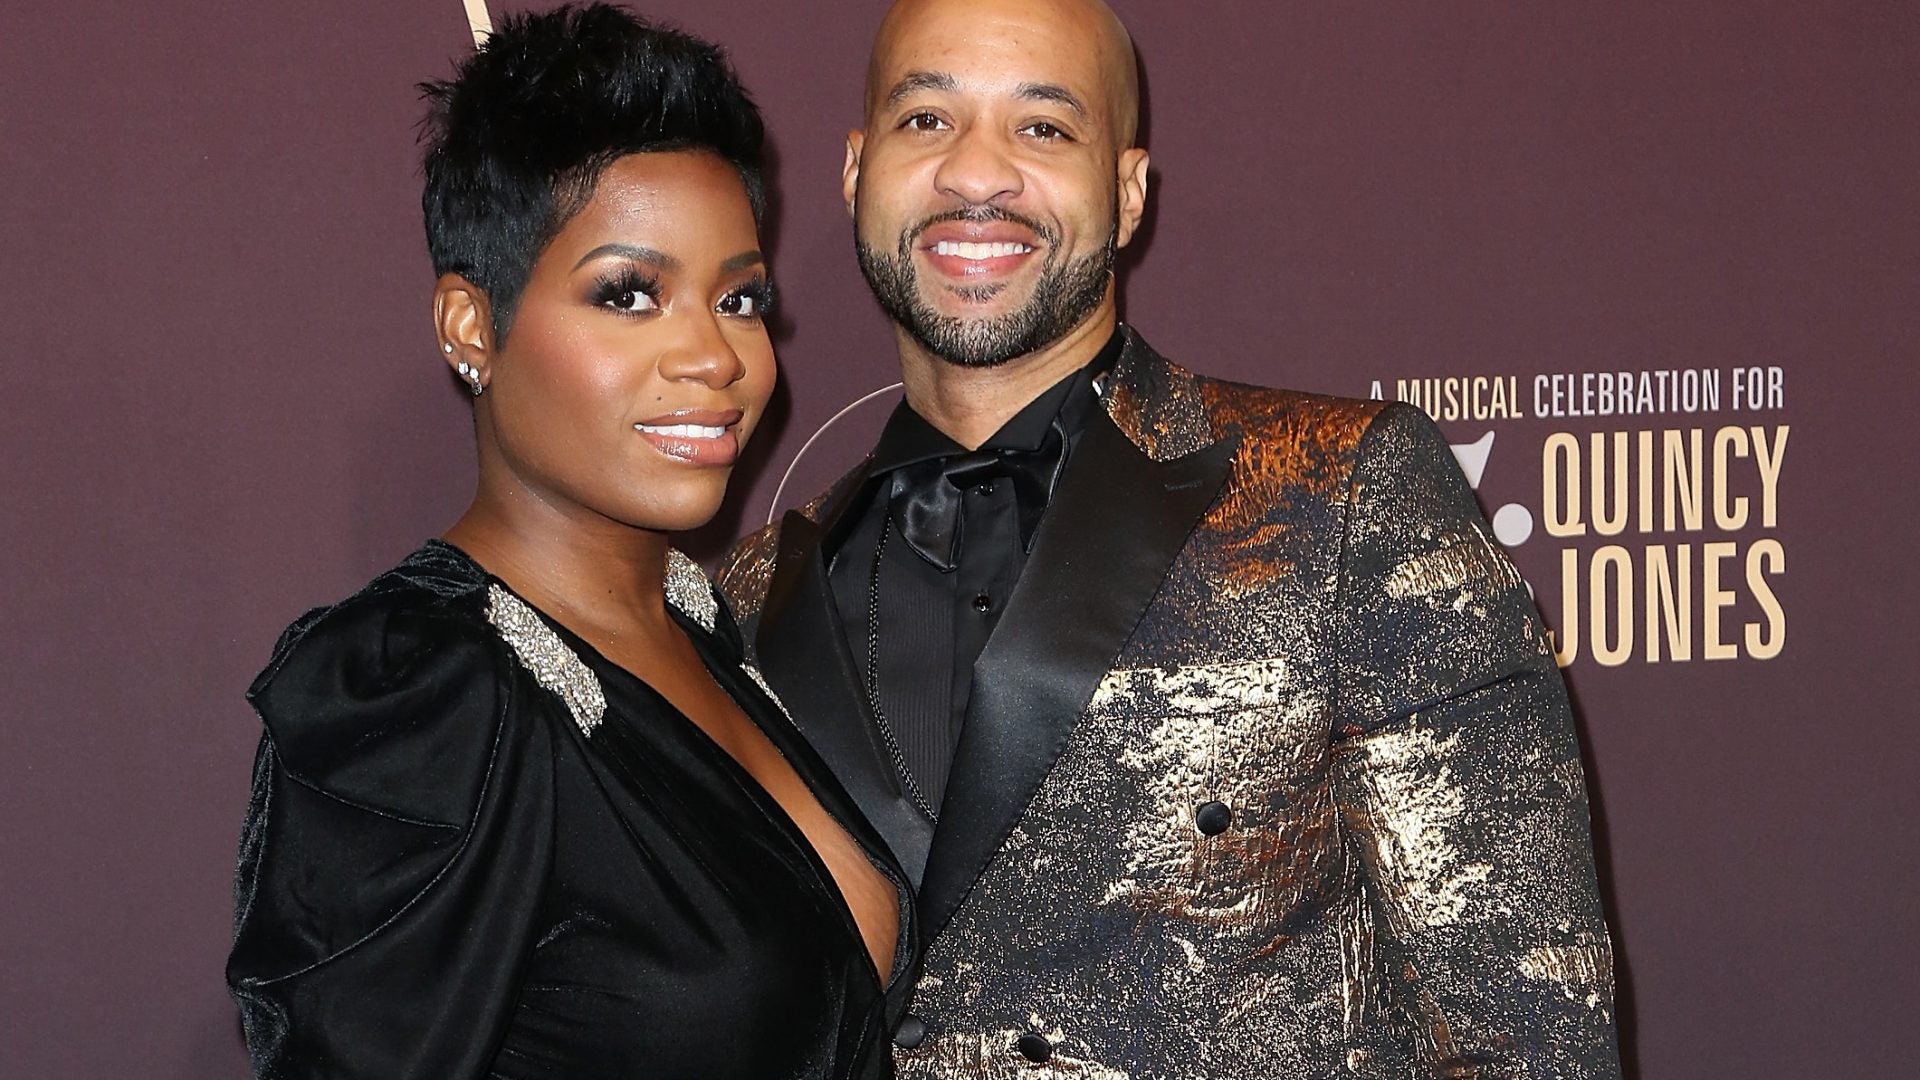 Fantasia And Kendall Taylor Turned On The Fireworks For Their Sweet Gender Reveal